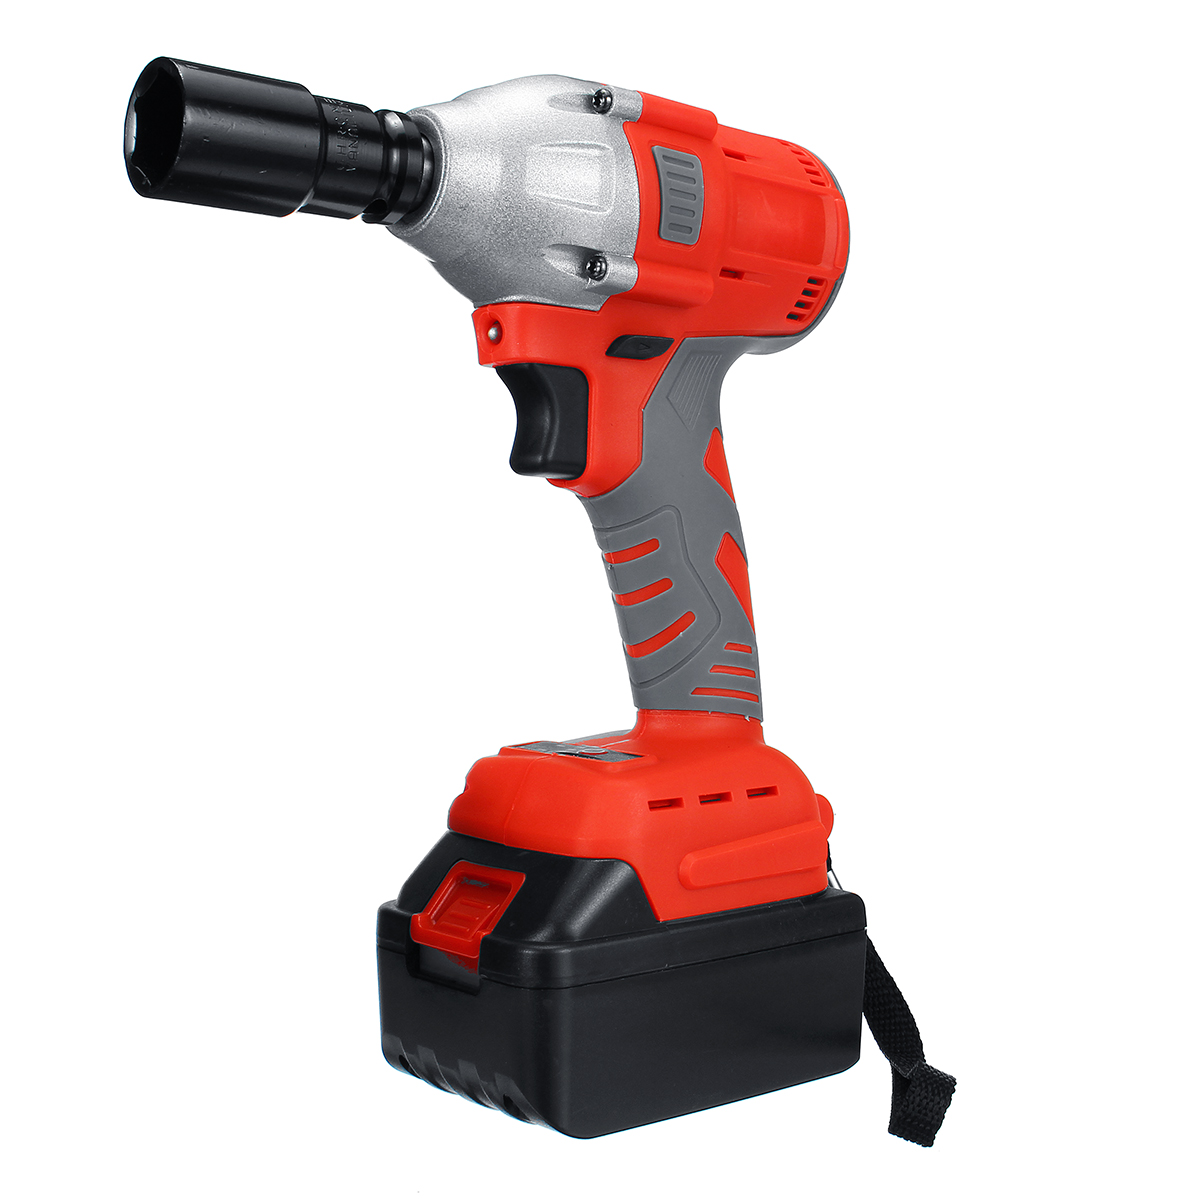 128VF188VF-Cordless-Rechargable-Brushless-Electric-Wrench-W-1or-2-Lithium-Battery-1431480-1